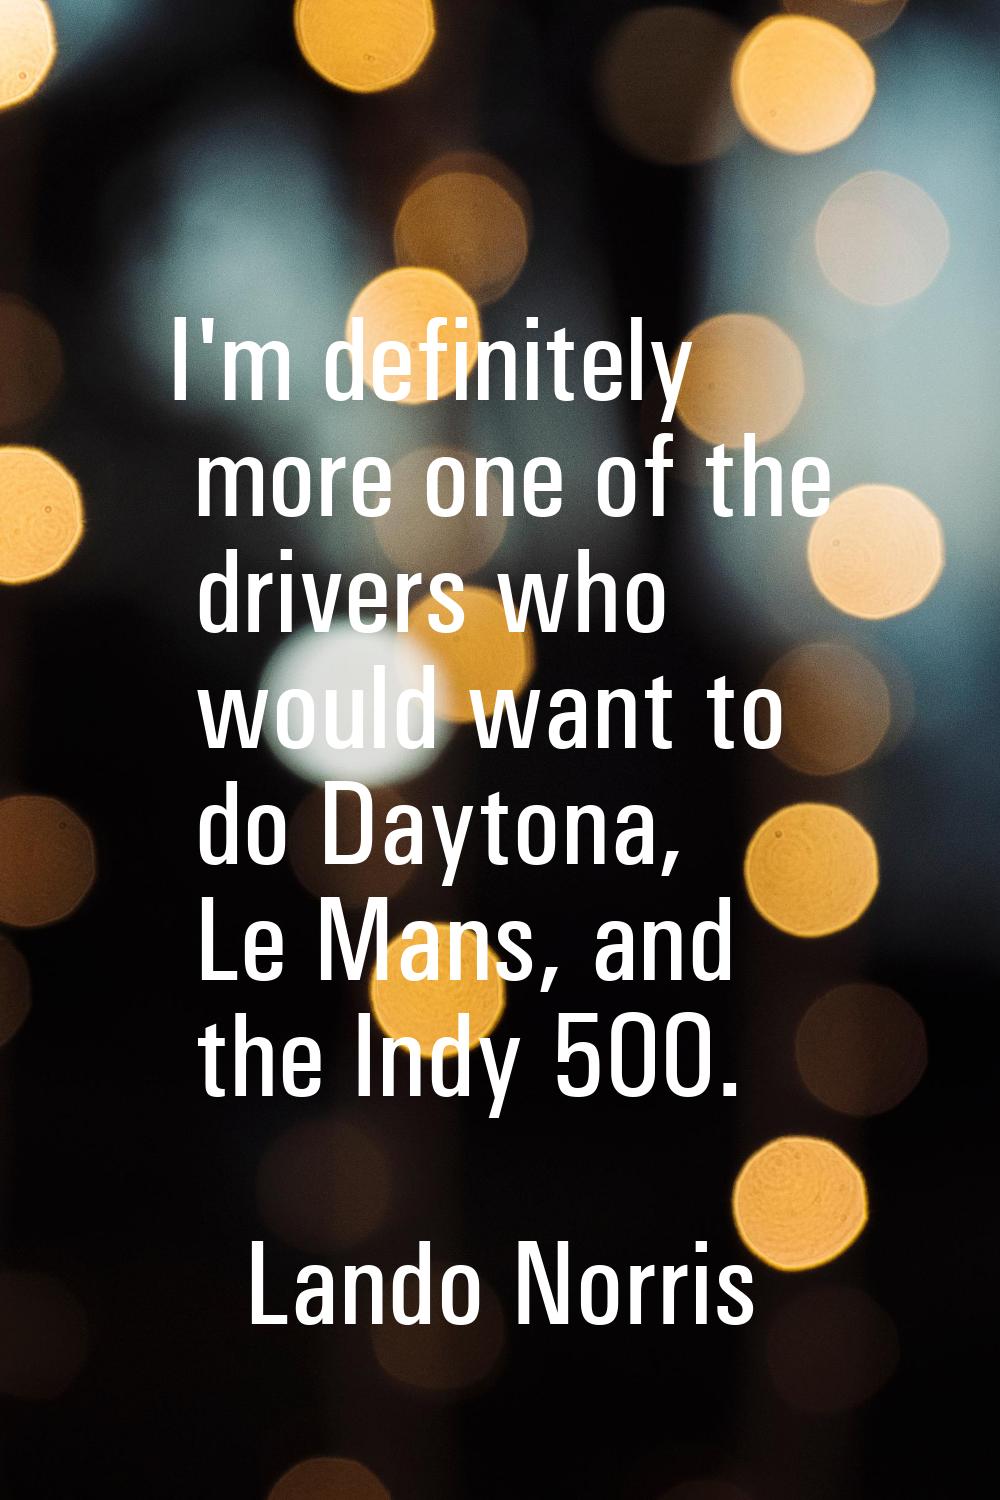 I'm definitely more one of the drivers who would want to do Daytona, Le Mans, and the Indy 500.